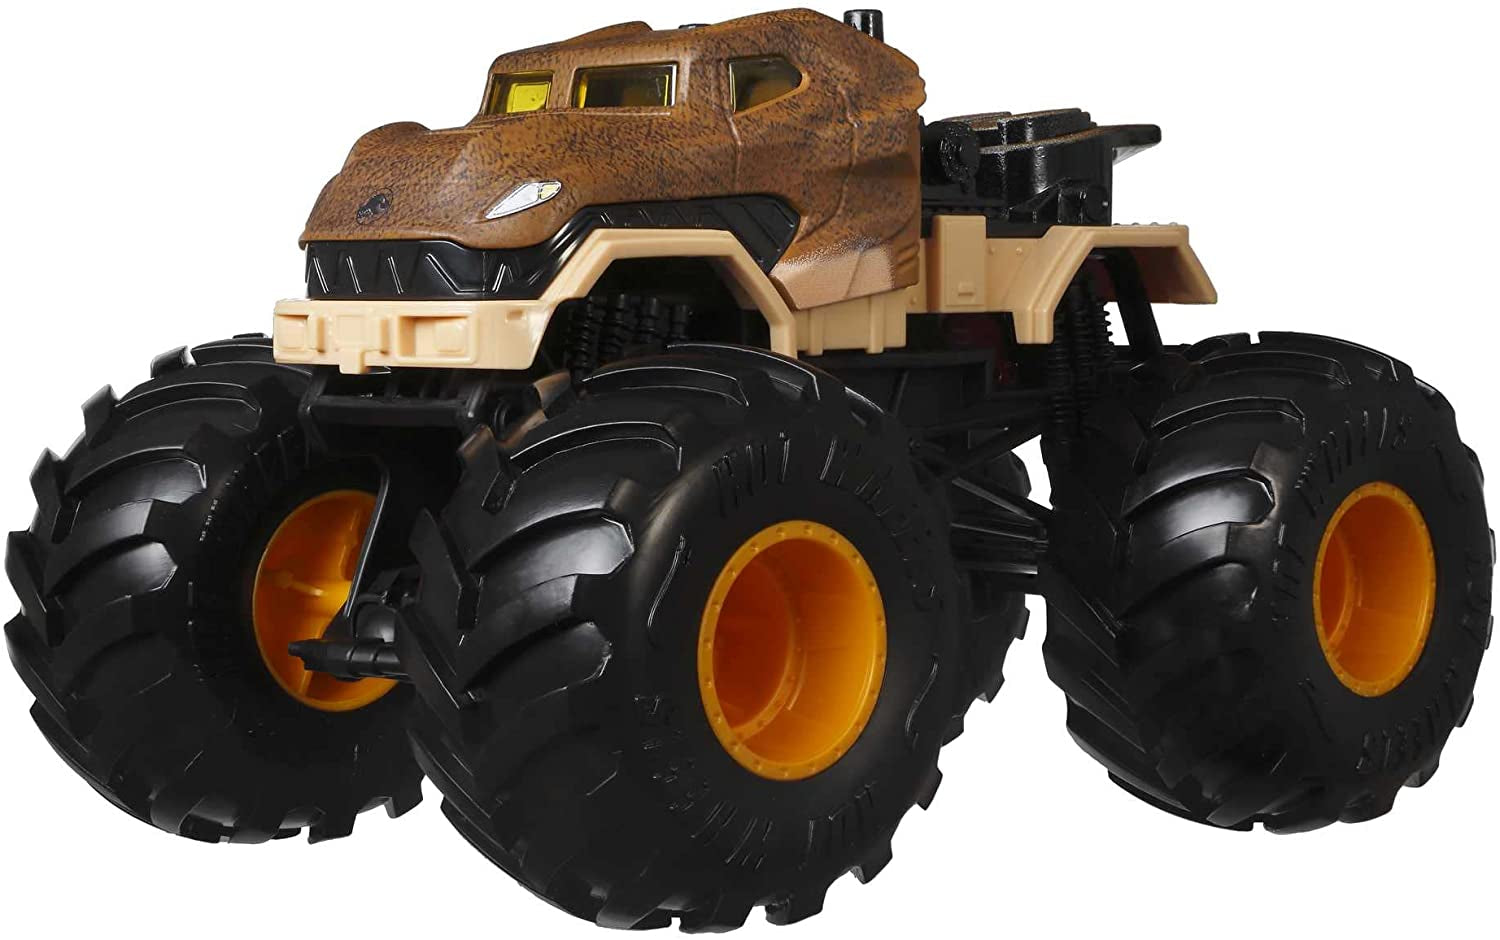 Hot Wheels Monster Truck 1:24 Scale Taxi Vehicle with Giant Wheels for Kids Age 3 to 8 Years Old Great Gift Toy Trucks Large Scales